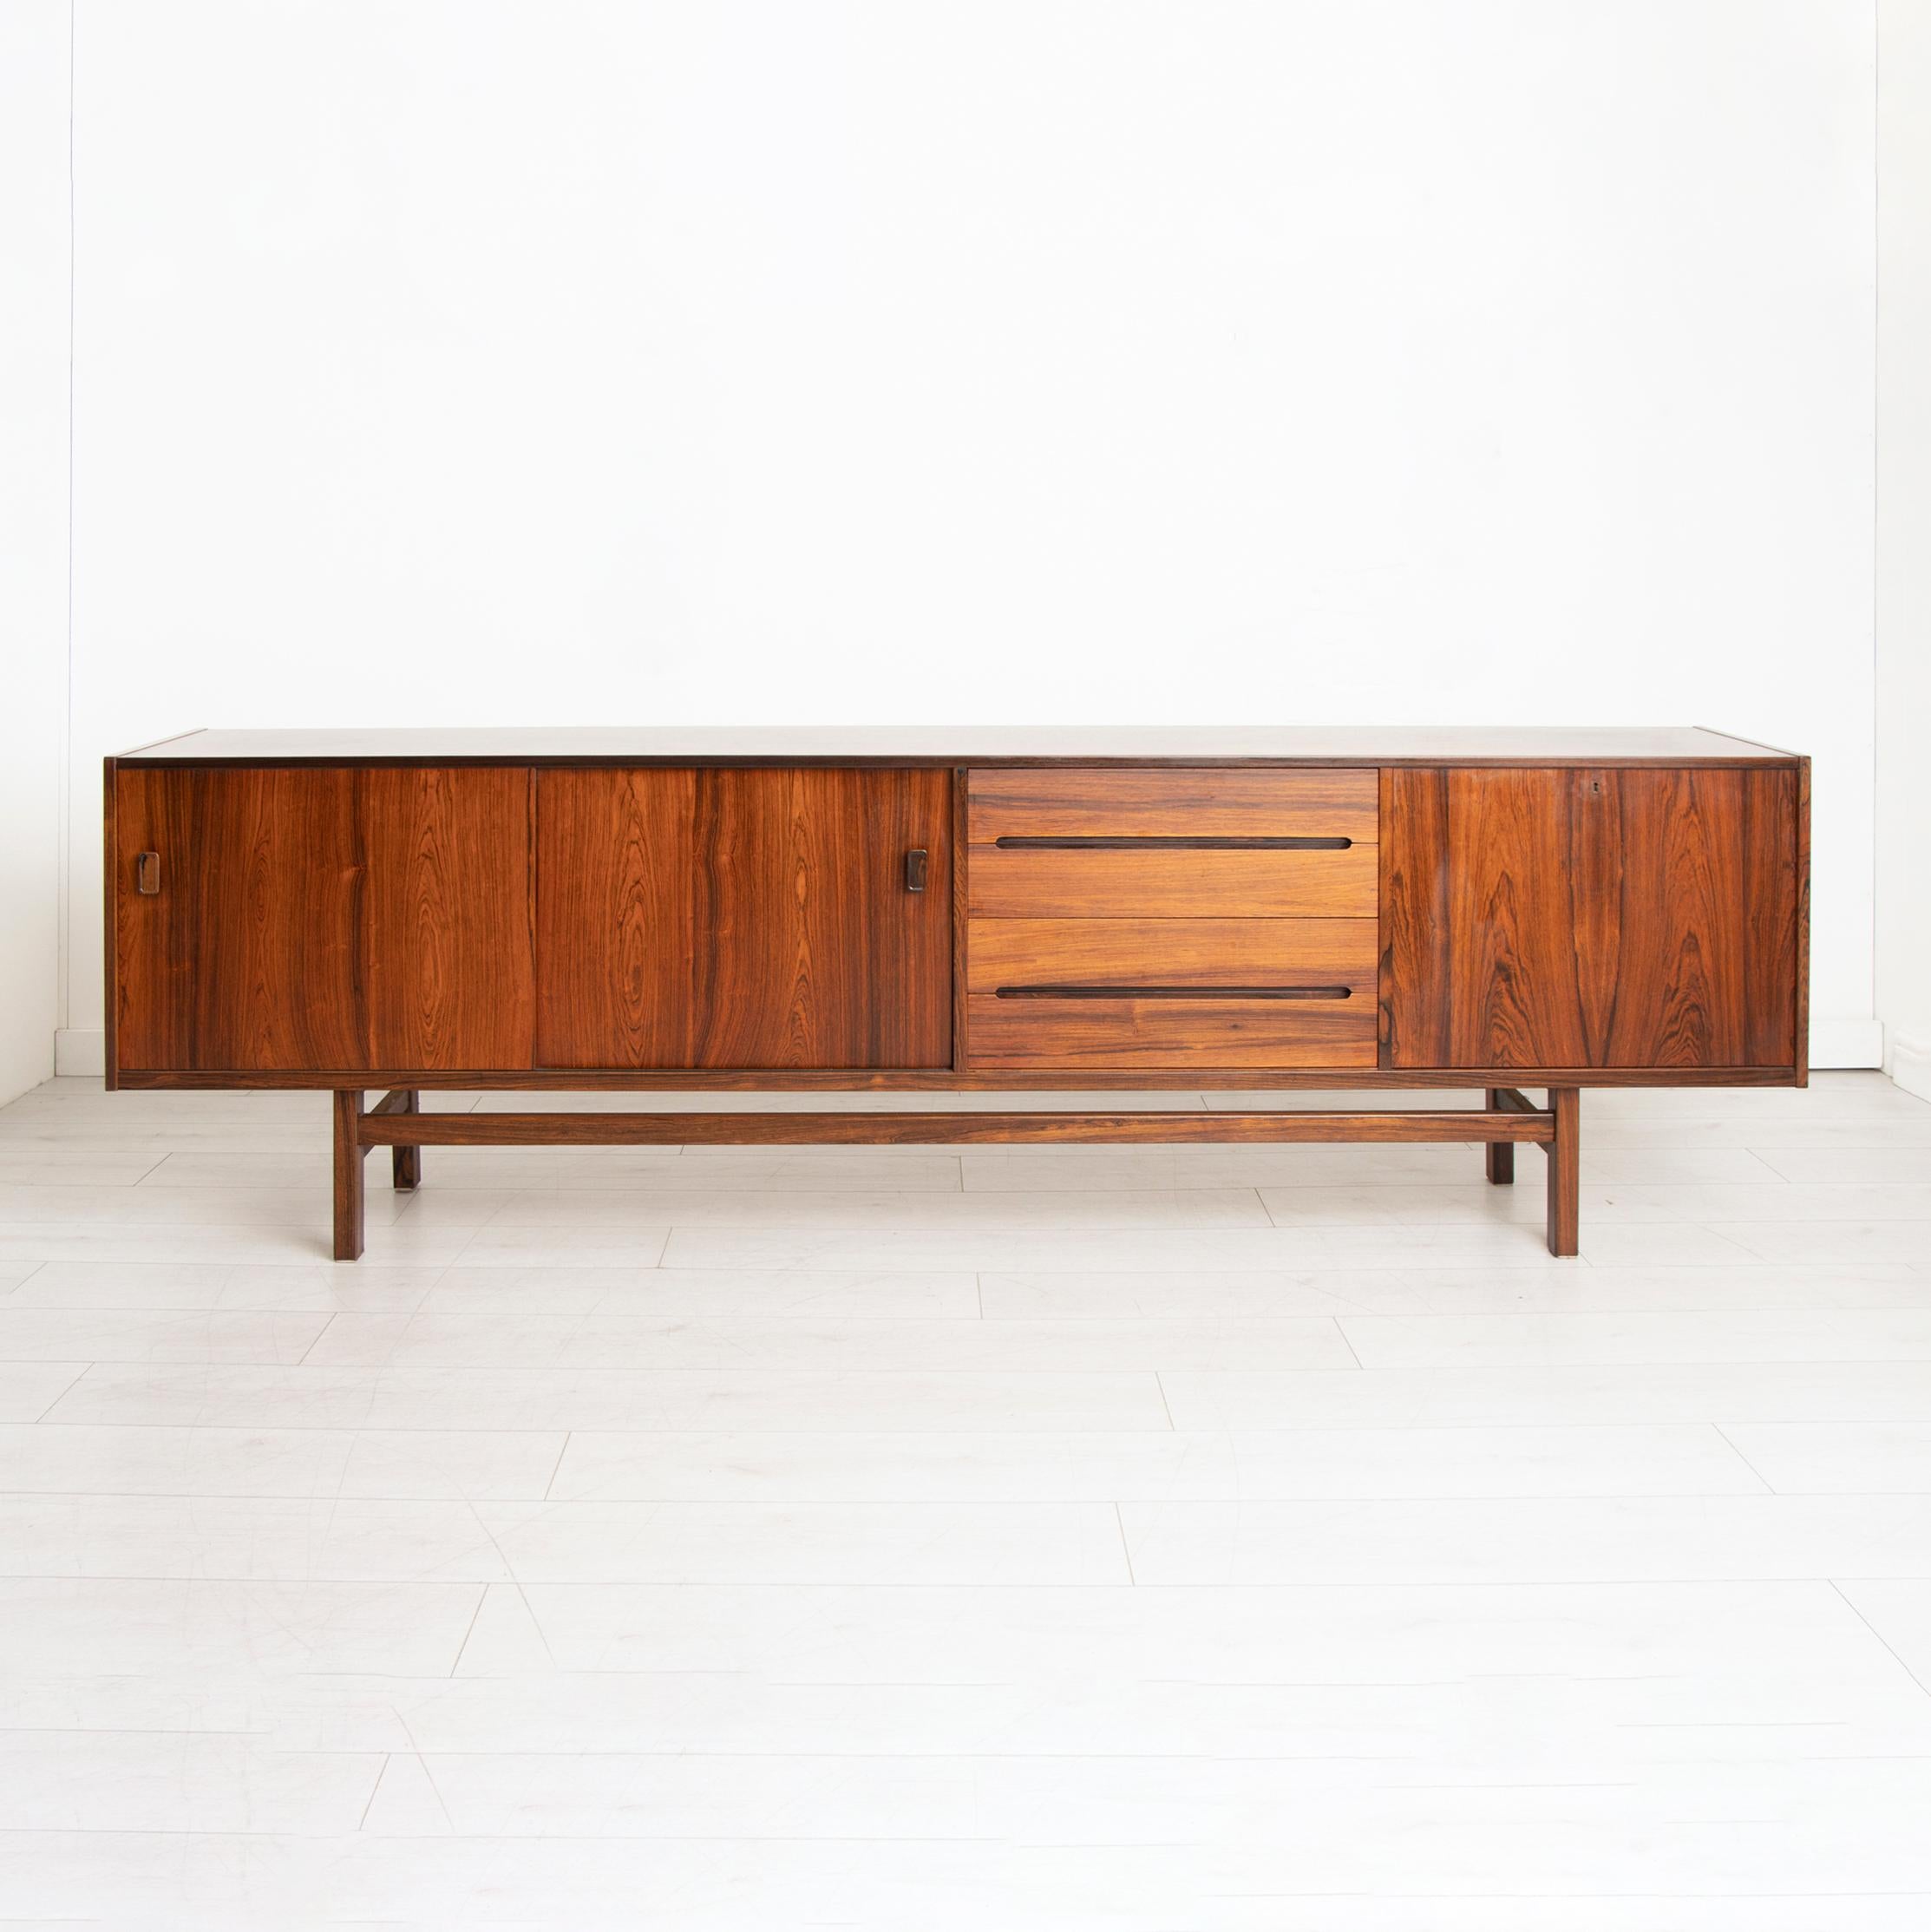 A midcentury long and low sideboard designed by Nils Jonsson for Troeds, Sweden. The sideboard is made in rosewood with two sliding doors with shelving behind, two drawers and a drop front bar.

Dimensions: W 253 x D 43 x H 78 cm.